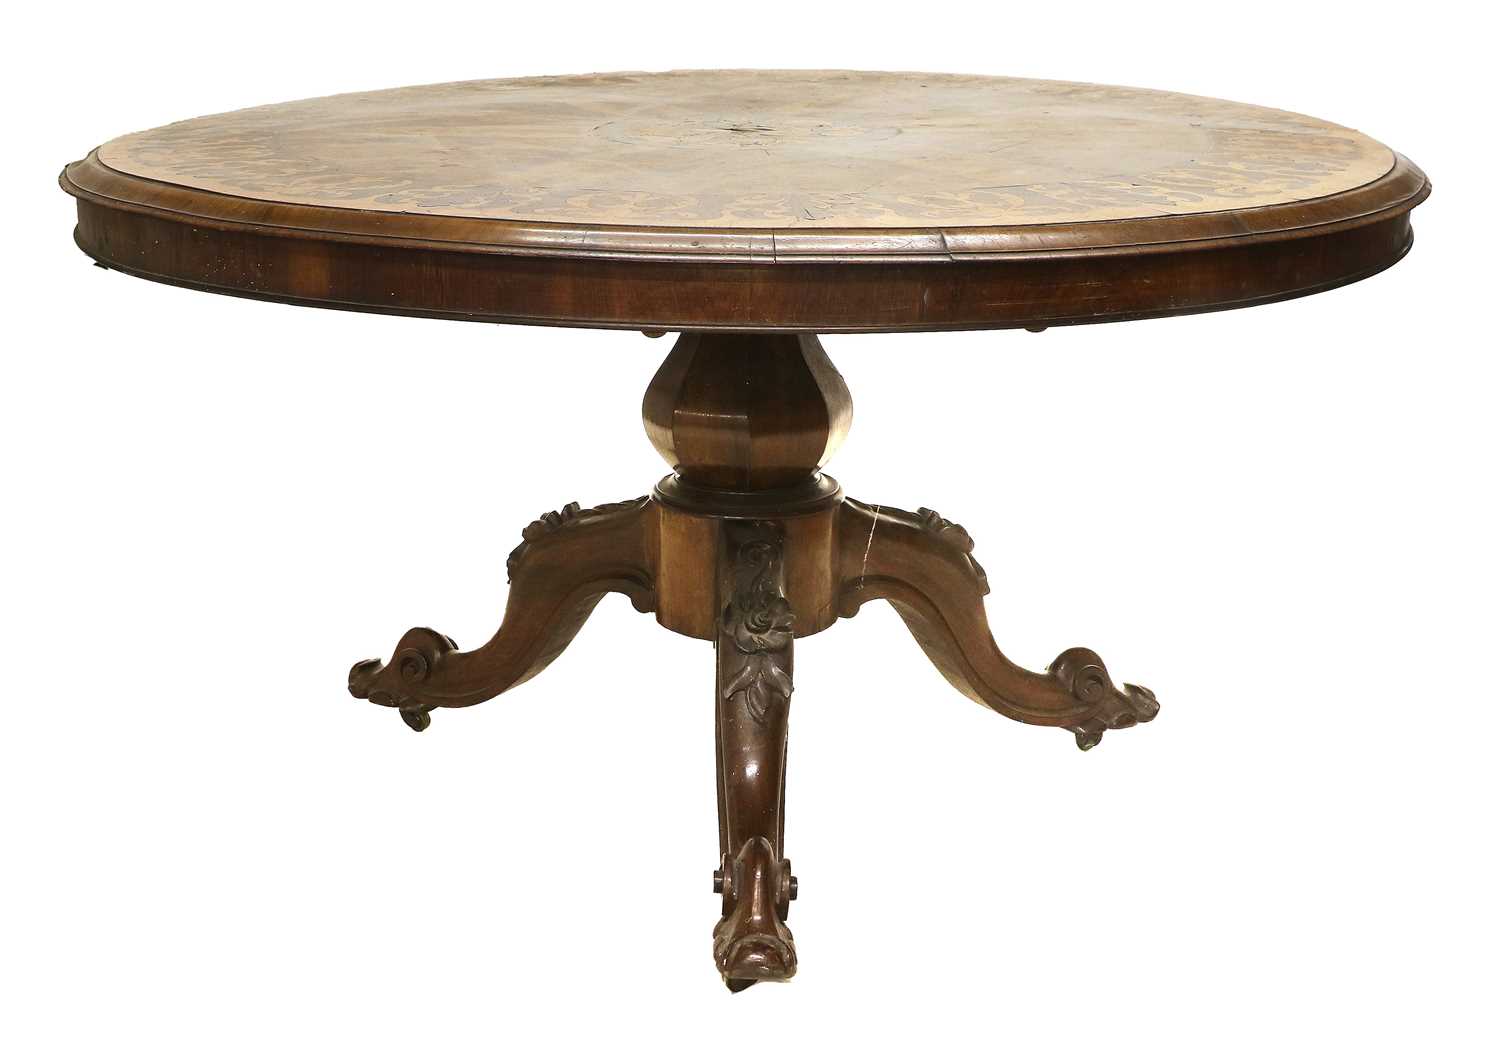 A Victorian Rosewood and Marquetry-Inlaid Circular Dining Table, circa 1870, the moulded top with